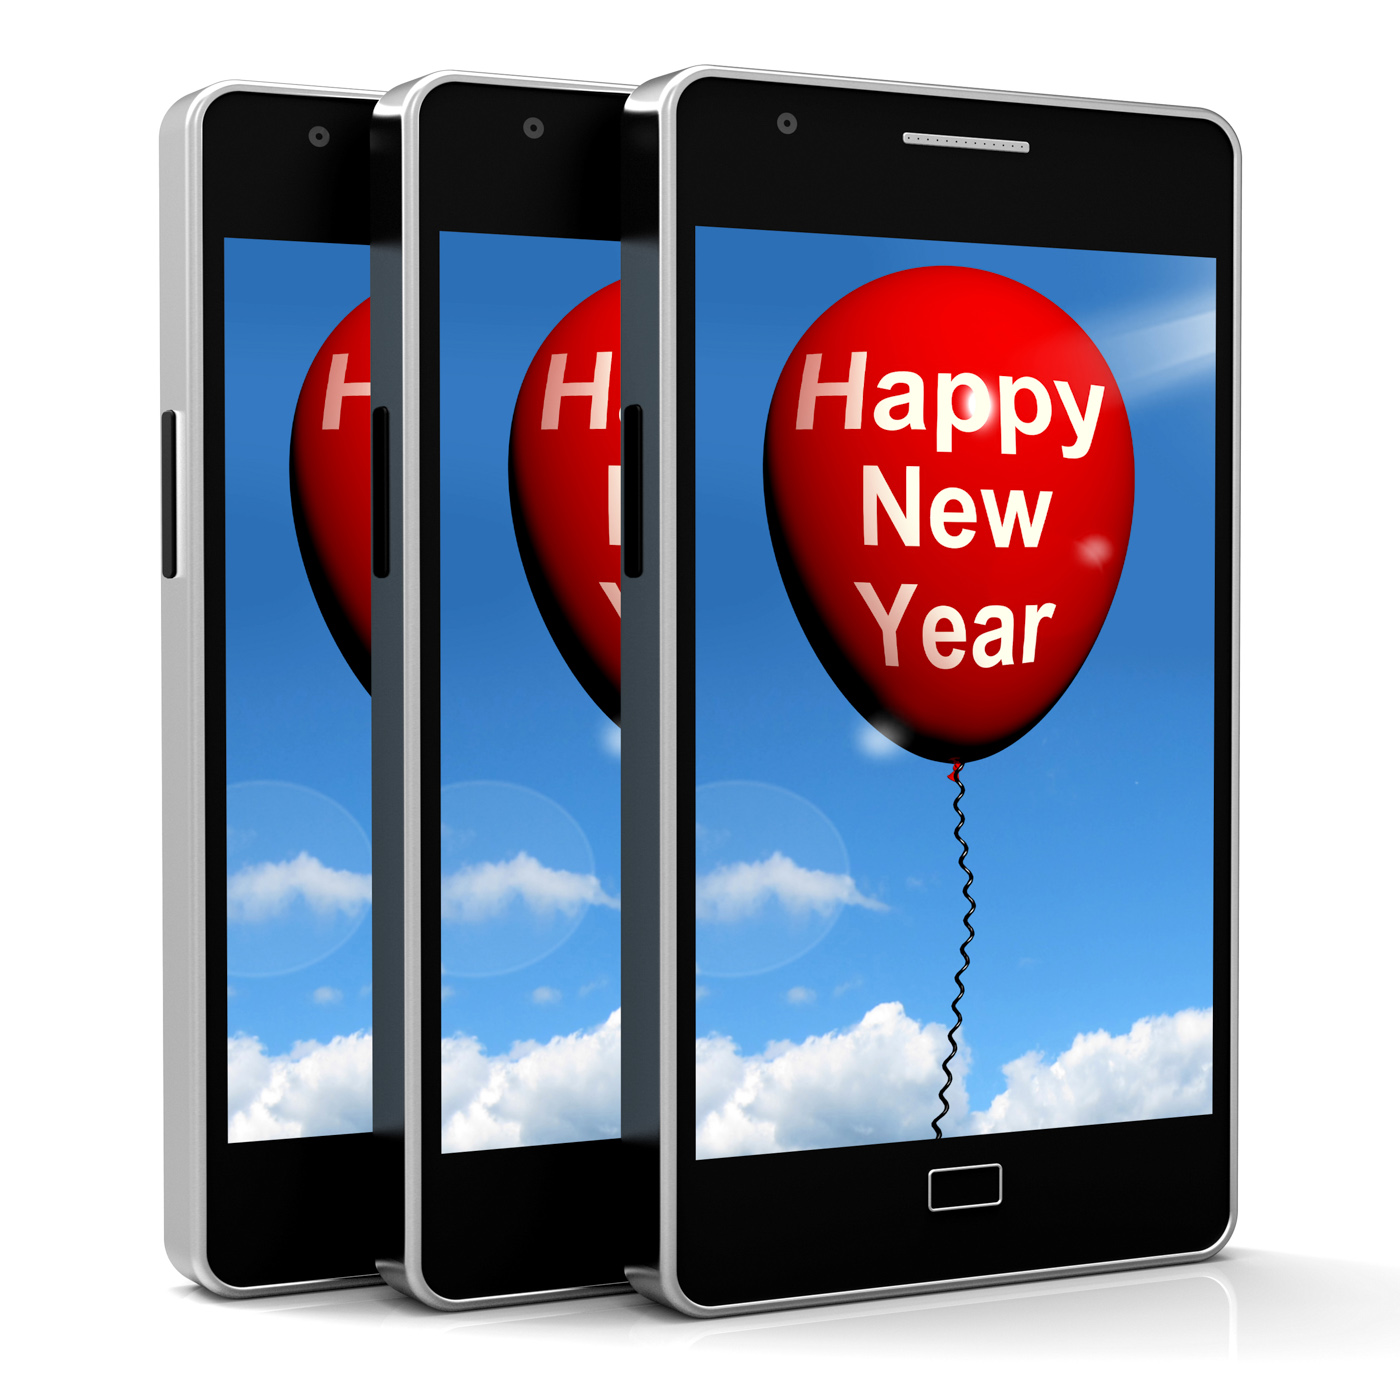 Happy New Year Balloon Shows Parties and Celebration, Balloon, Online, Www, Web, HQ Photo